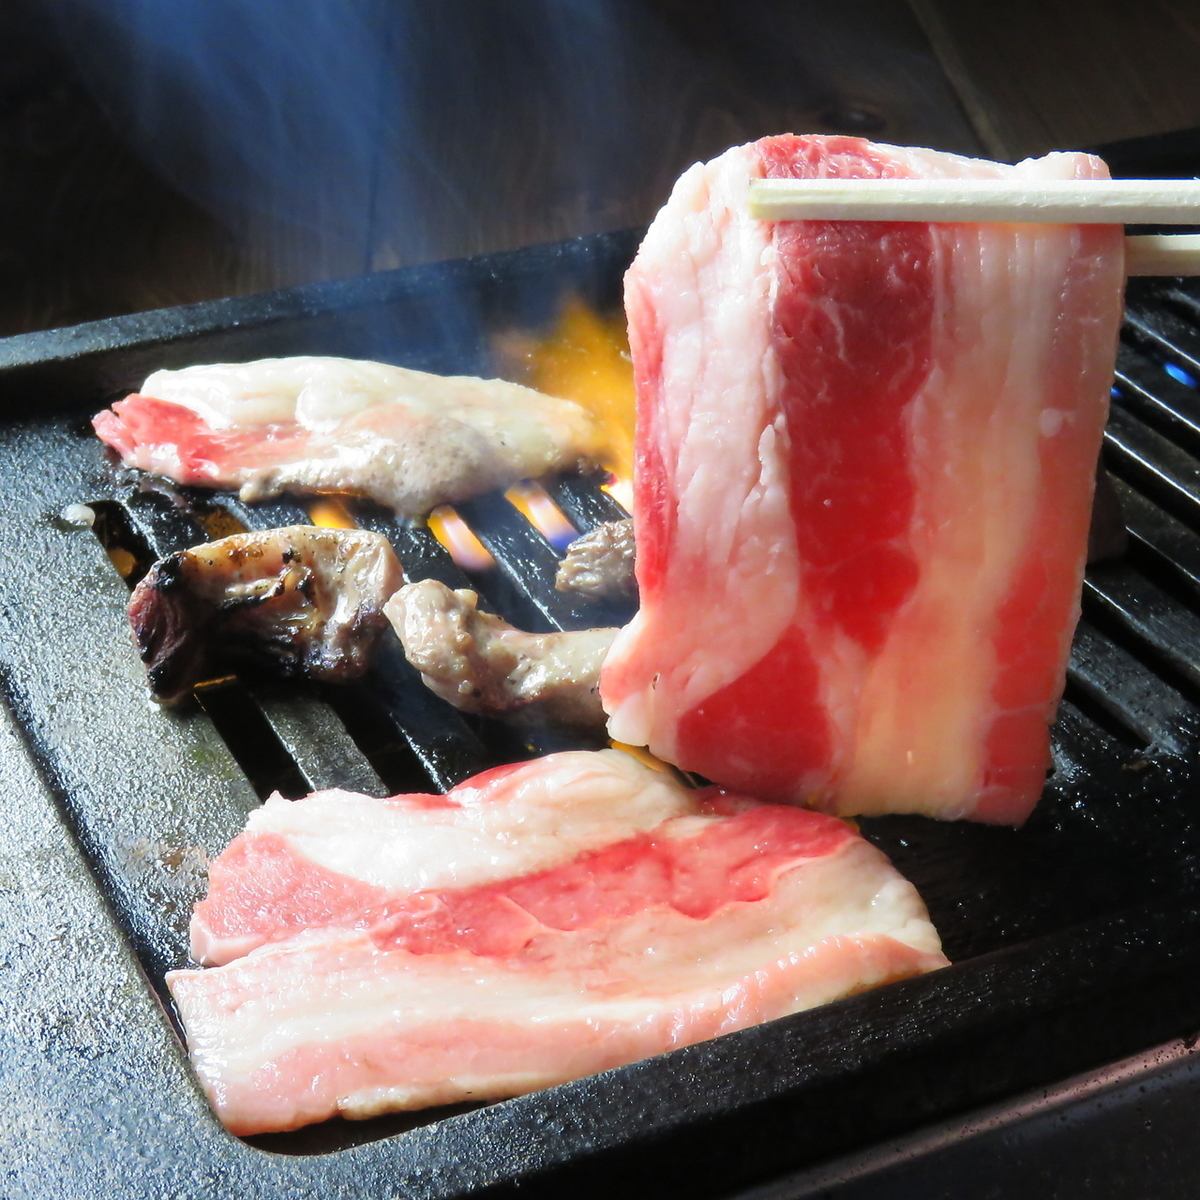 All you can eat and drink Yakiniku with your family! If you want to enjoy meat at a great value, choose us!